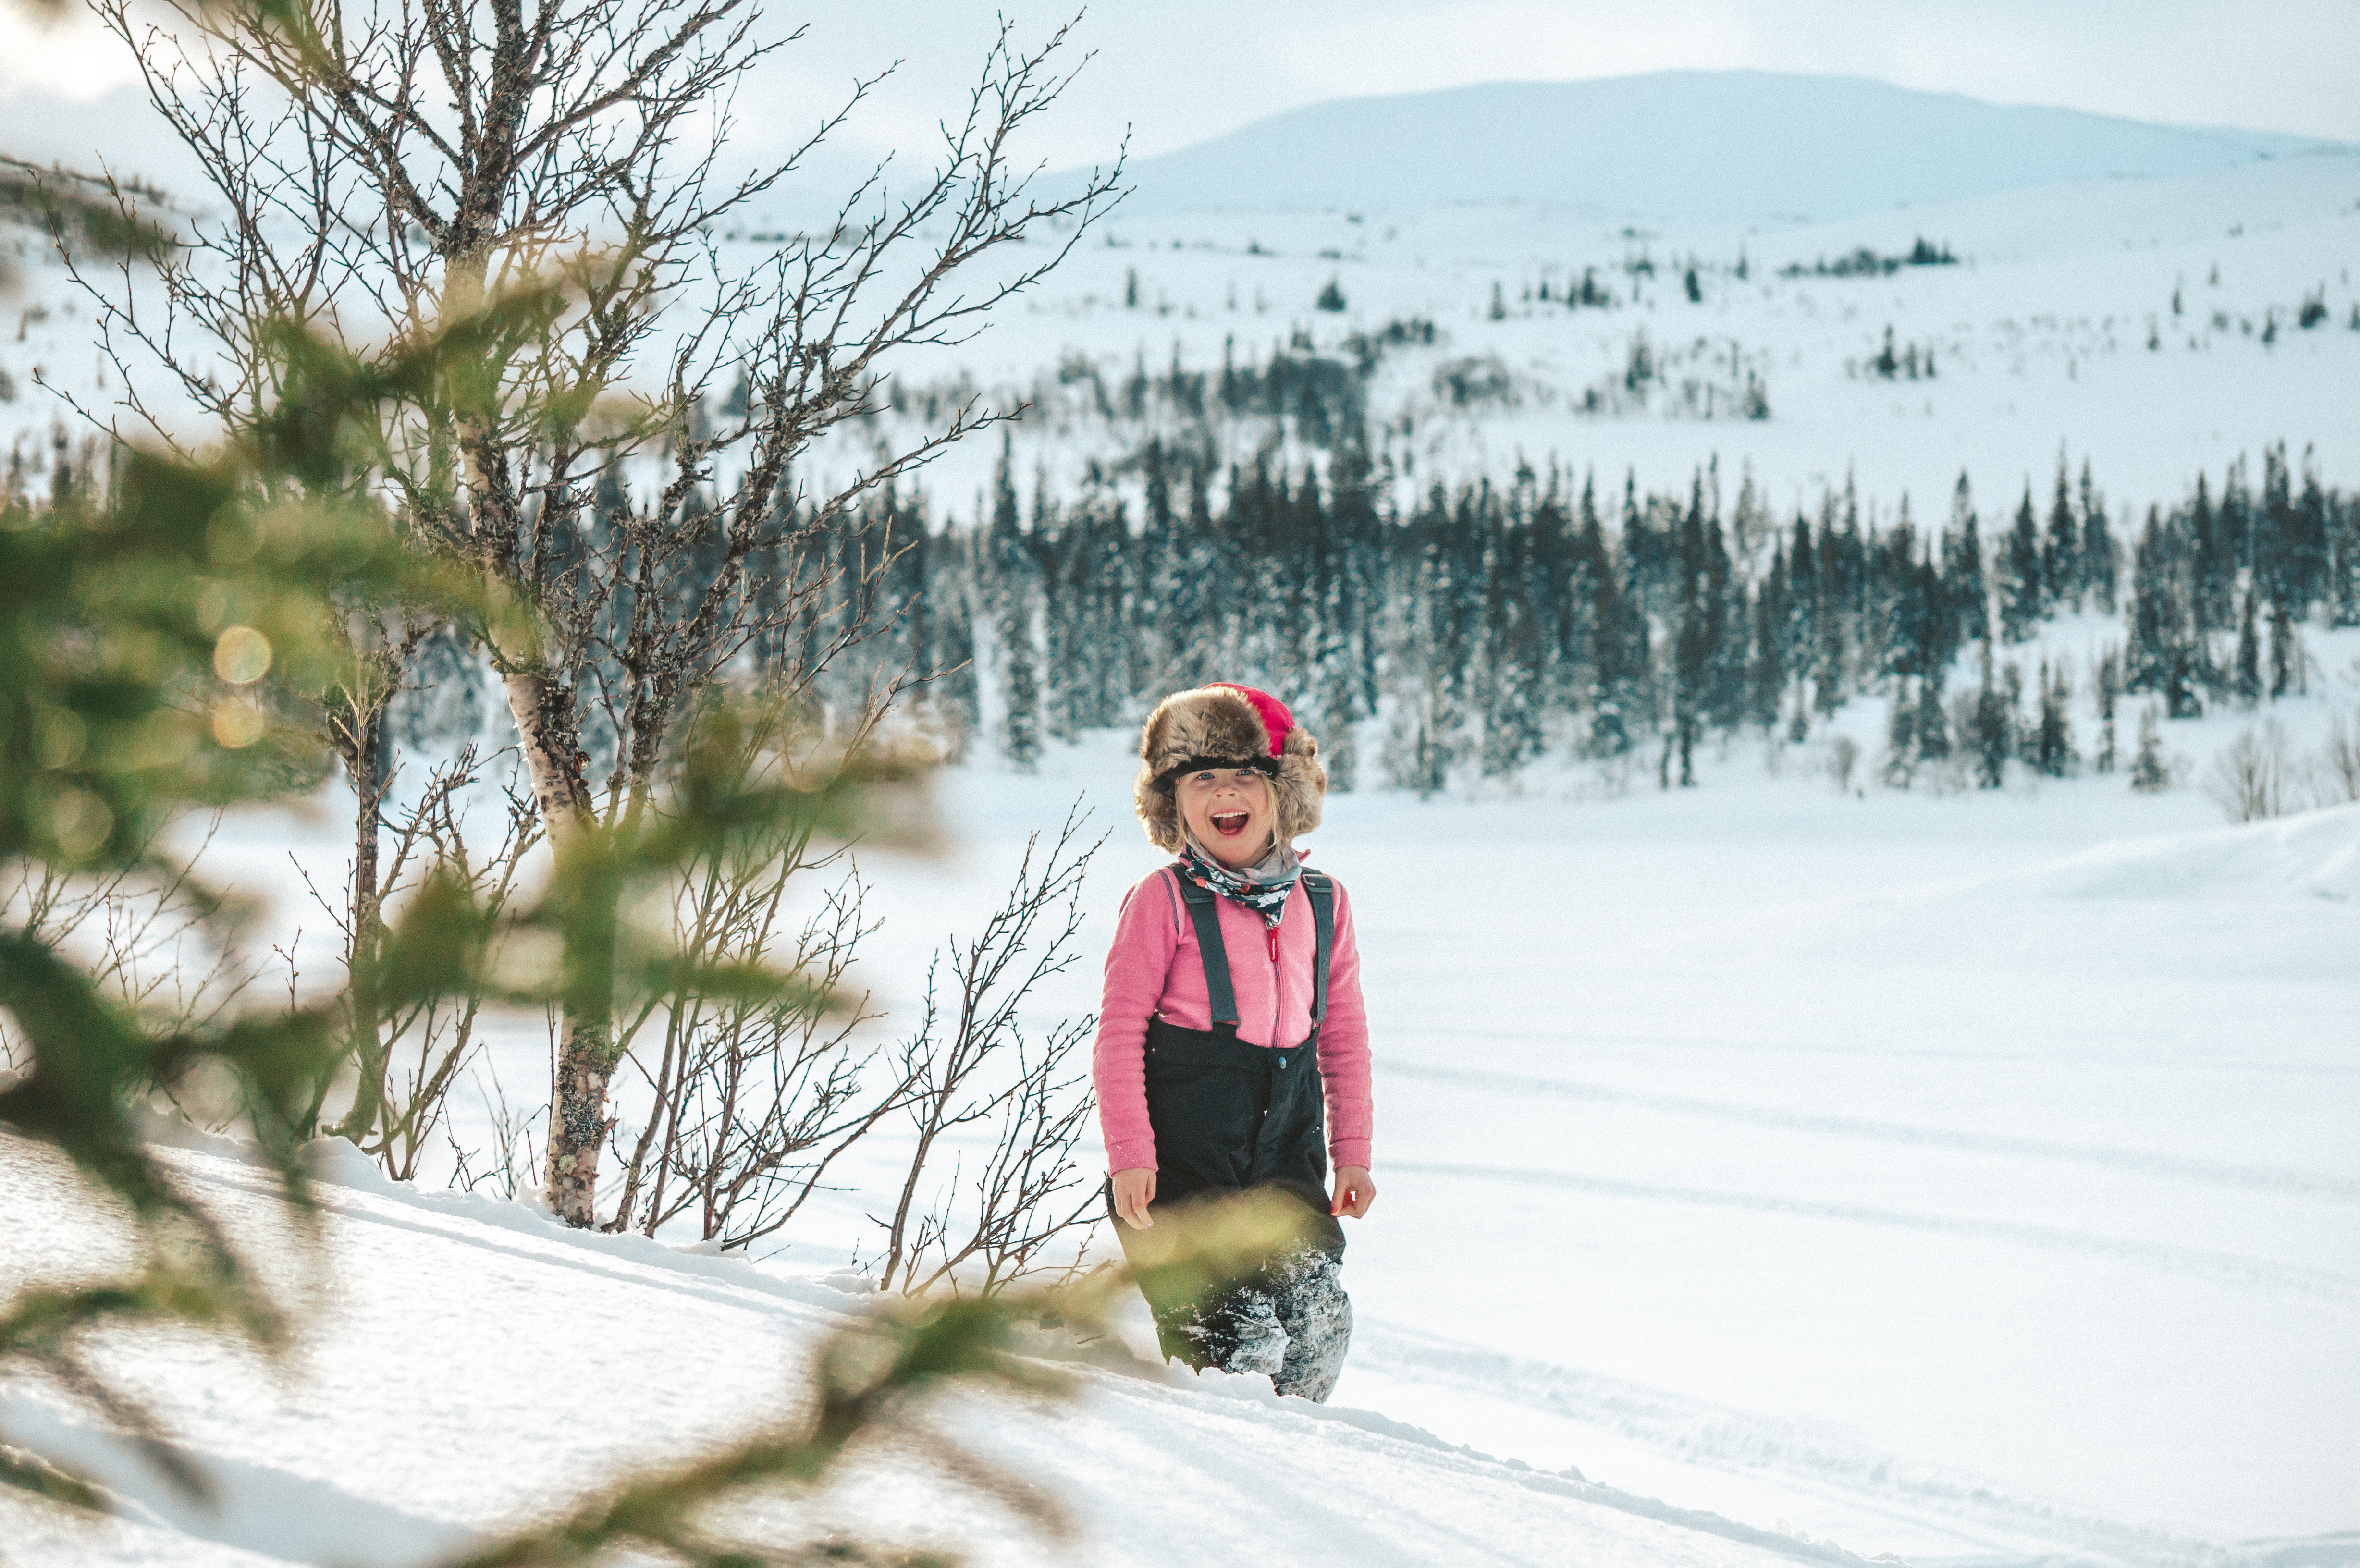 Five tips for successful outdoor recreation with children